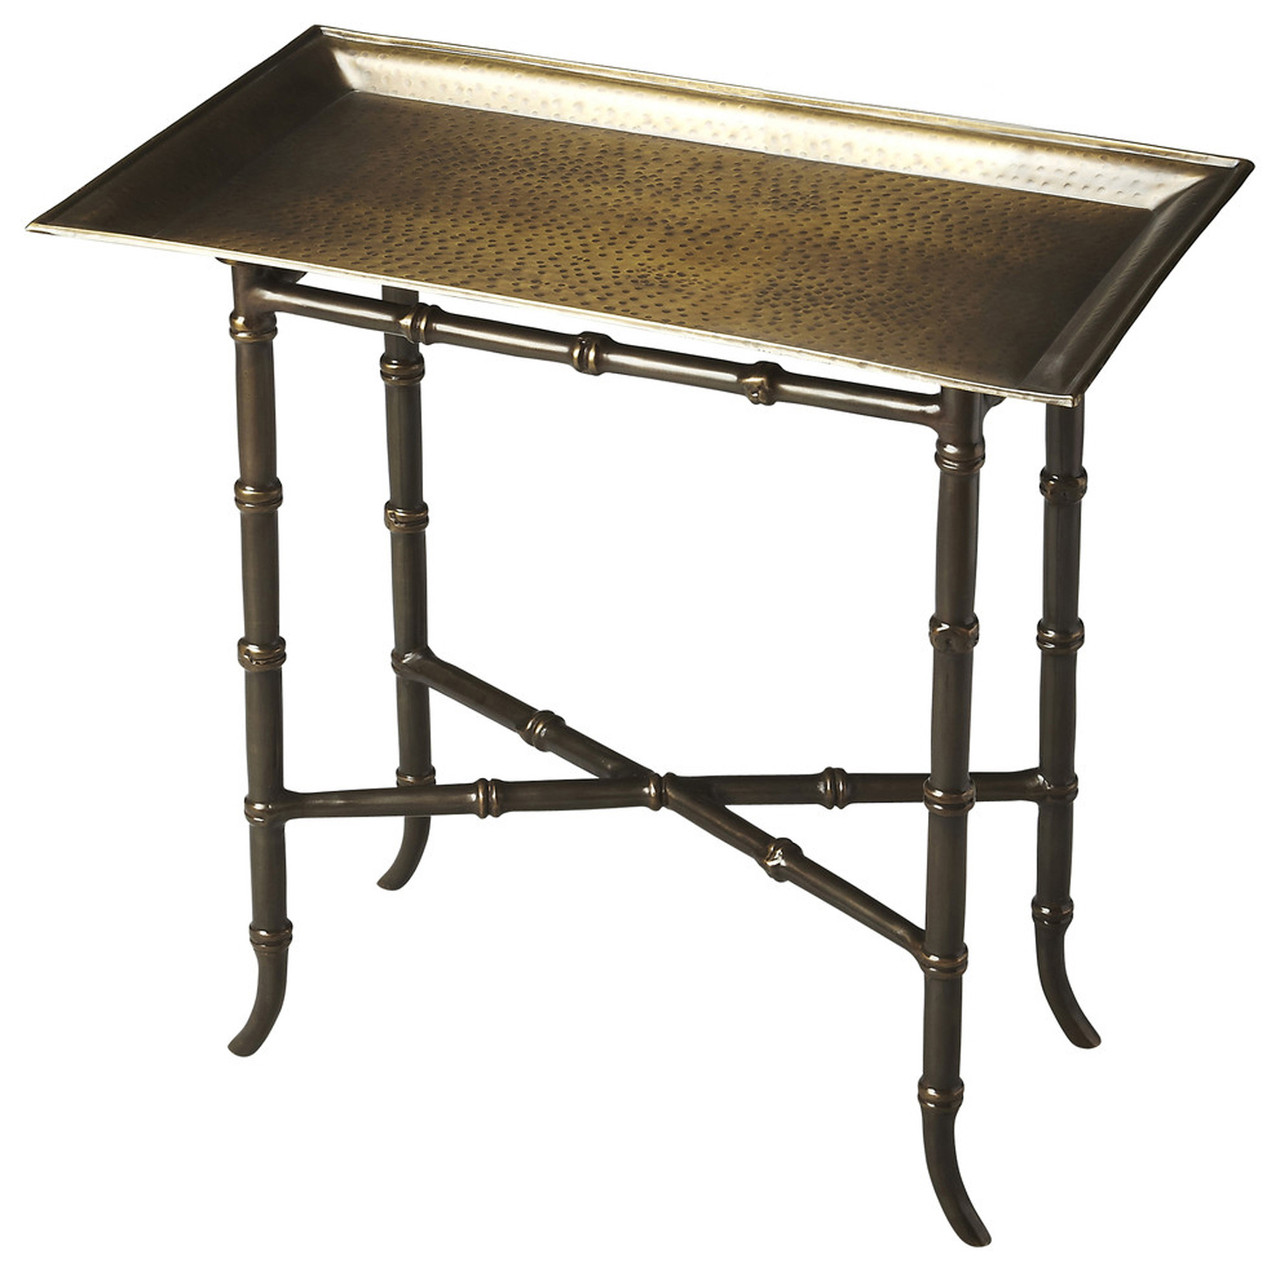 Meiling Antique Brass Tray Table (2399025) - Isabelle's Lighting